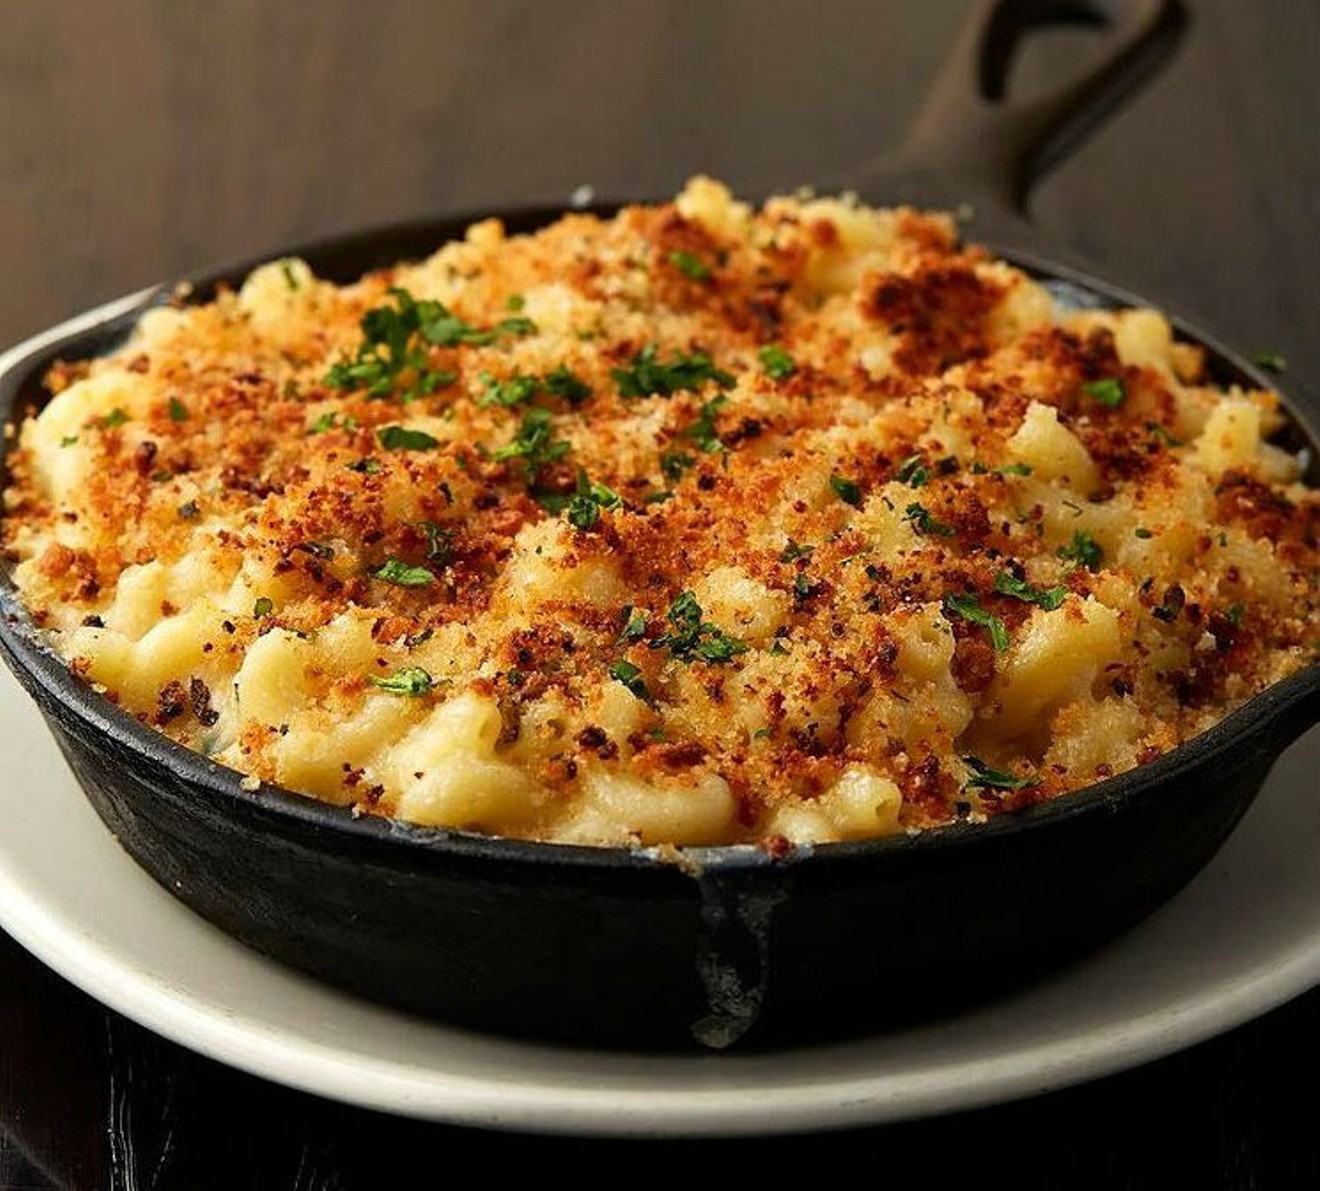 Dish Preston Hollow closed Jan. 2, so you can no longer try its jalapeño mac and cheese.